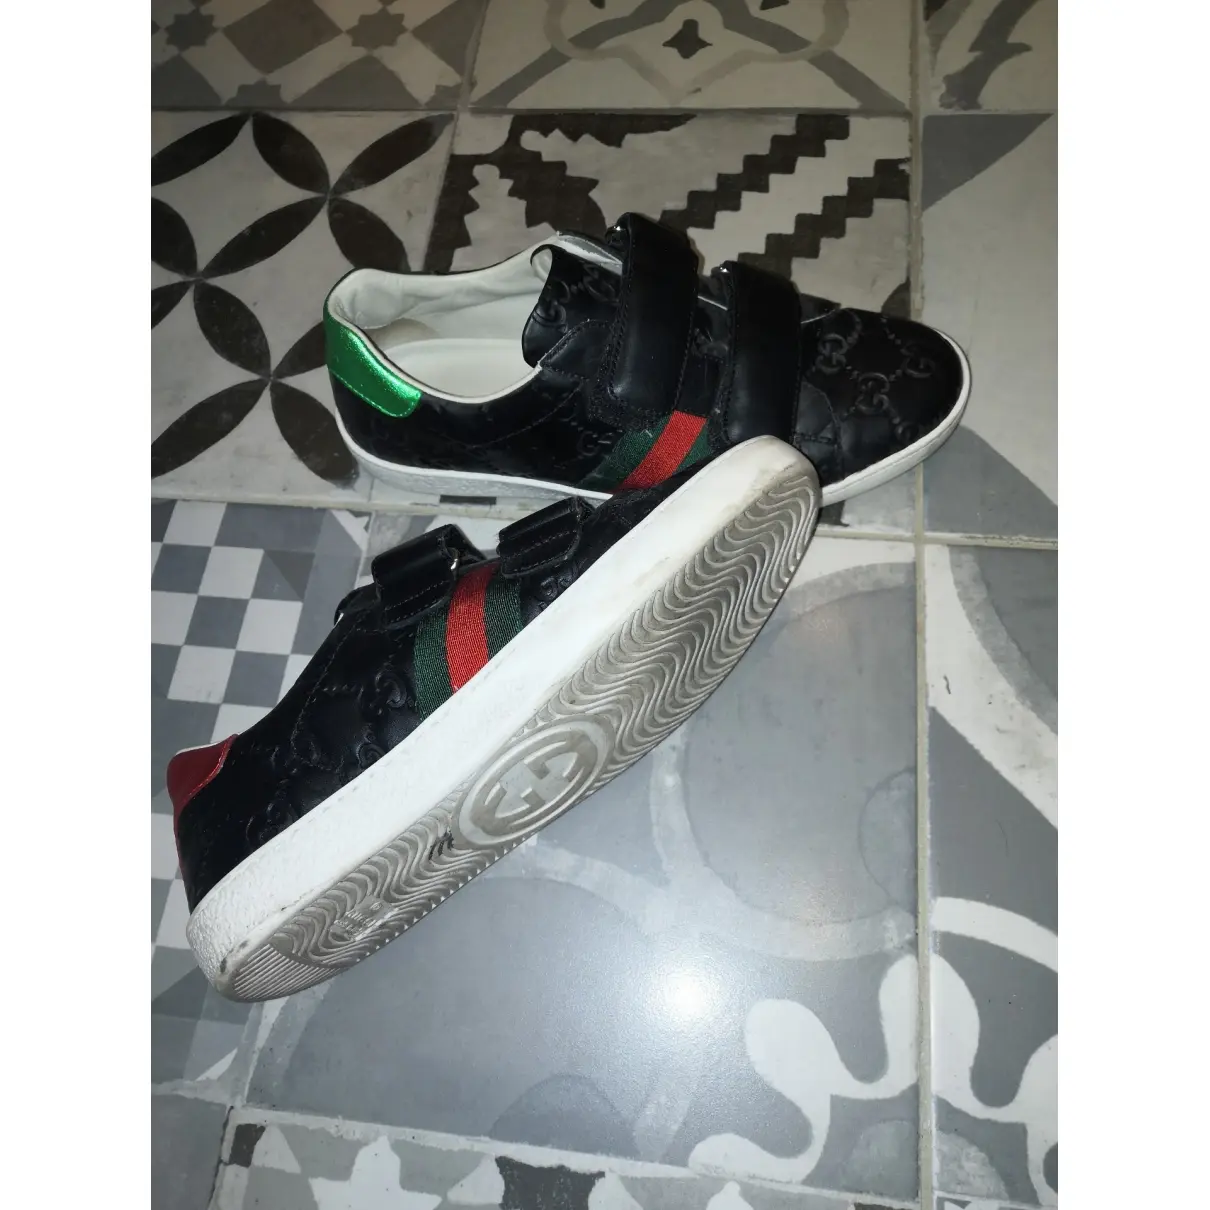 Buy Gucci Ace leather trainers online